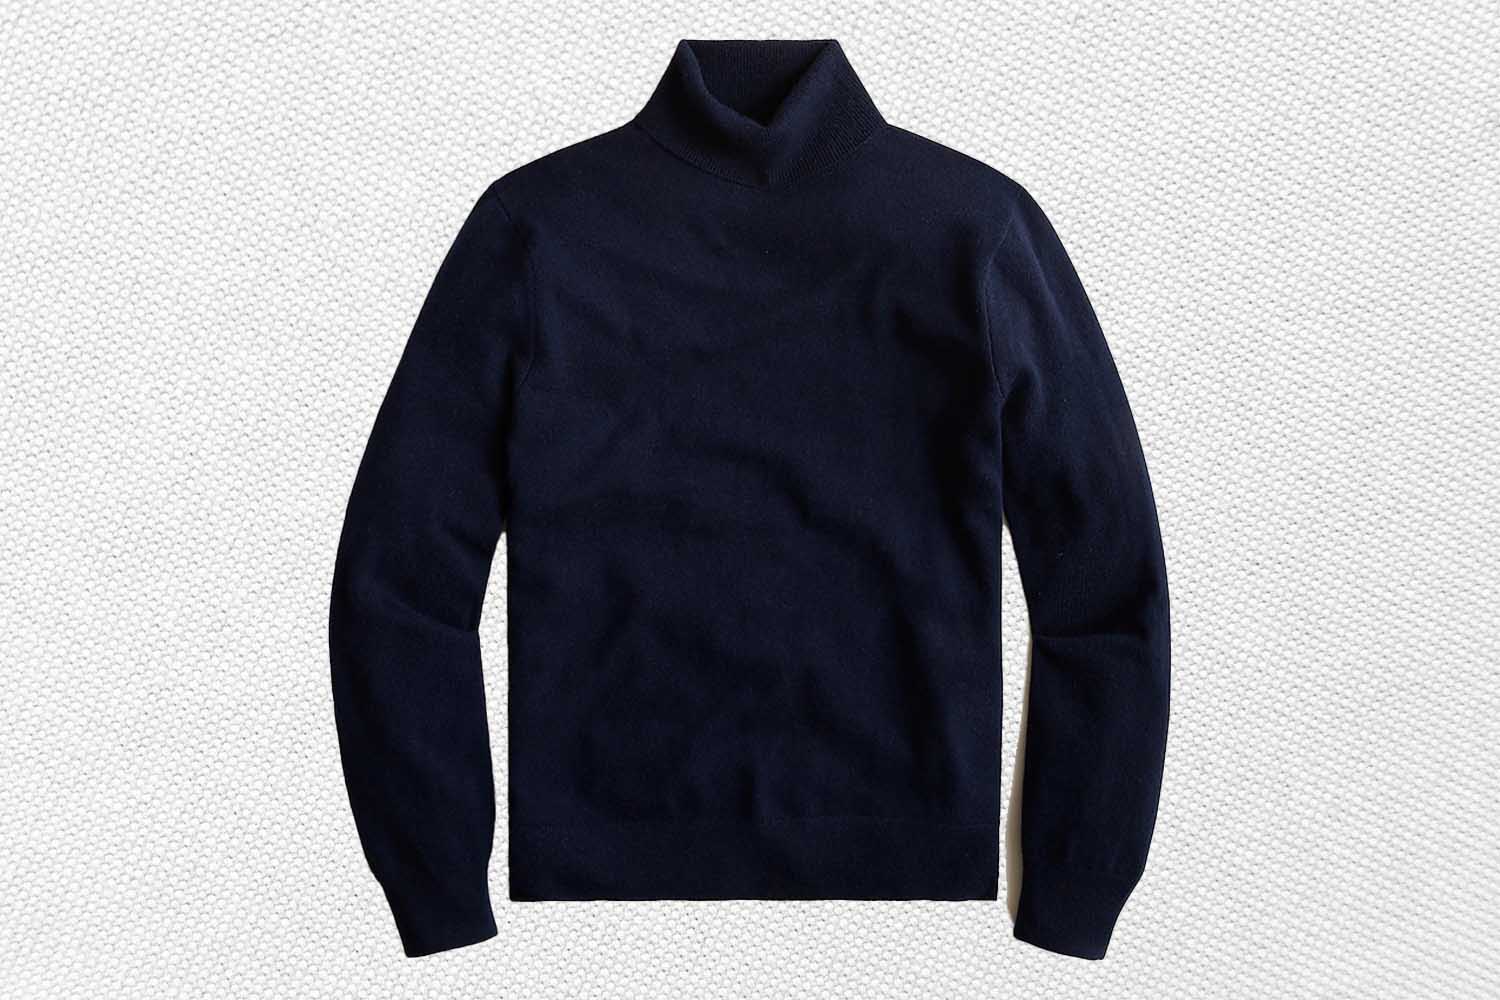 a navy cashmere turtleneck from J.Crew on a textured white background